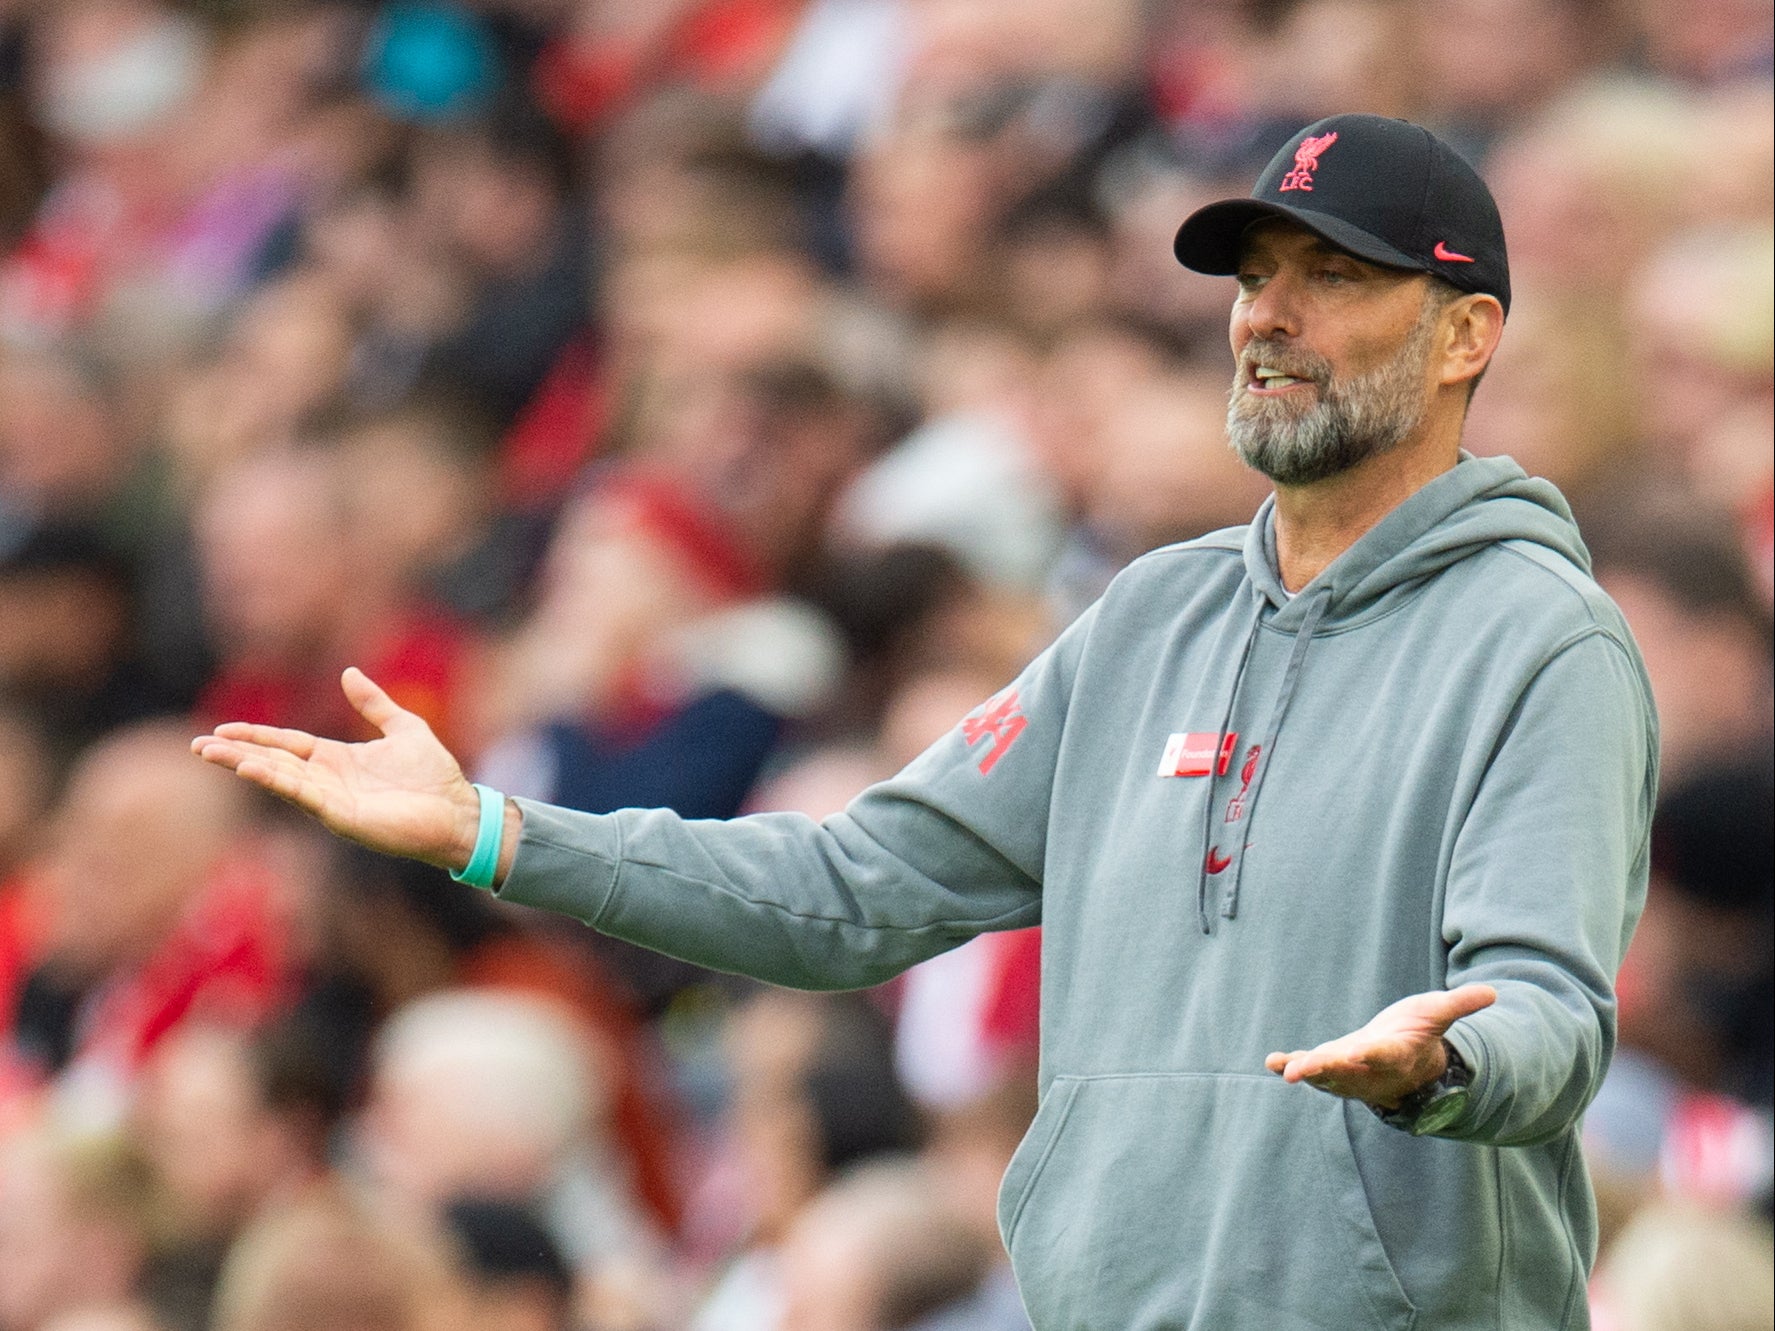 Jurgen Klopp has discussed Liverpool’s transfer plans if they miss out on Champions League football